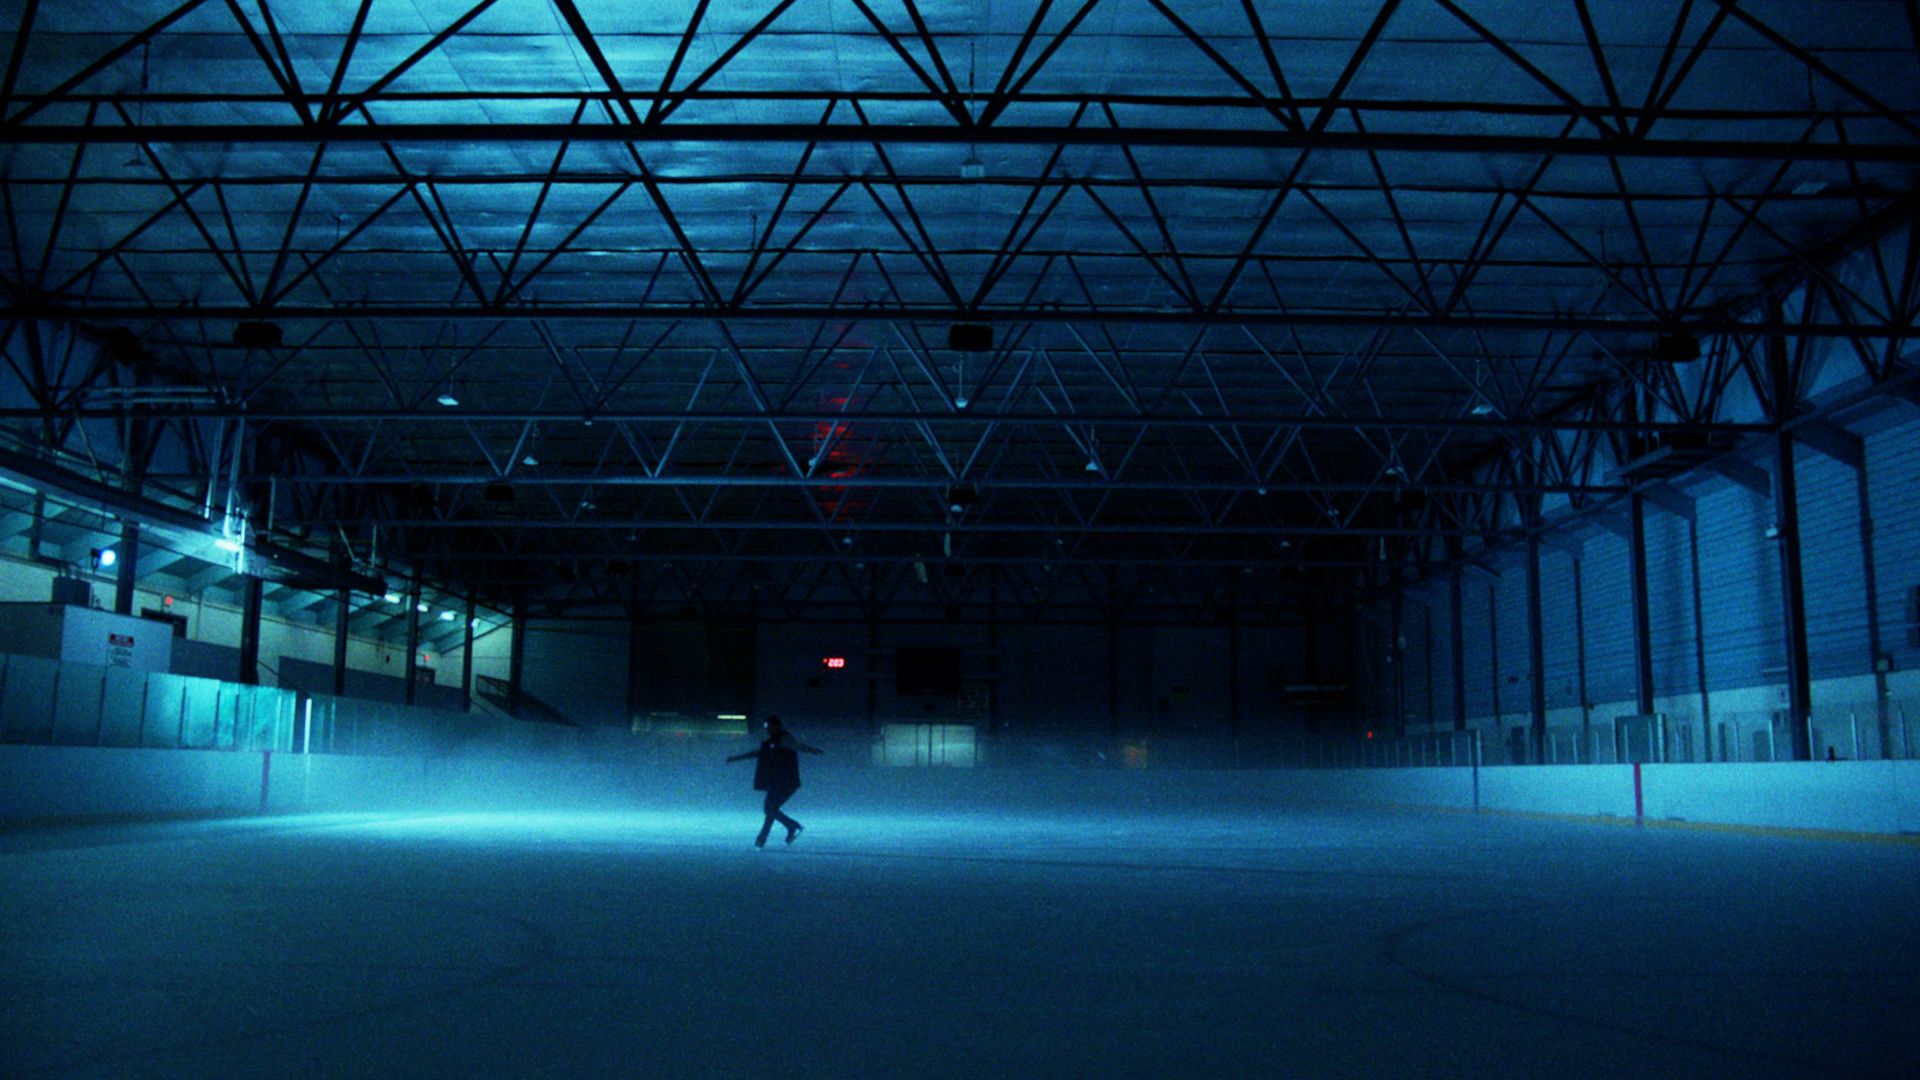 Wide photo of a dimly lit ice skating rink, with a solitary silhouetted figure skating in the middle ground.